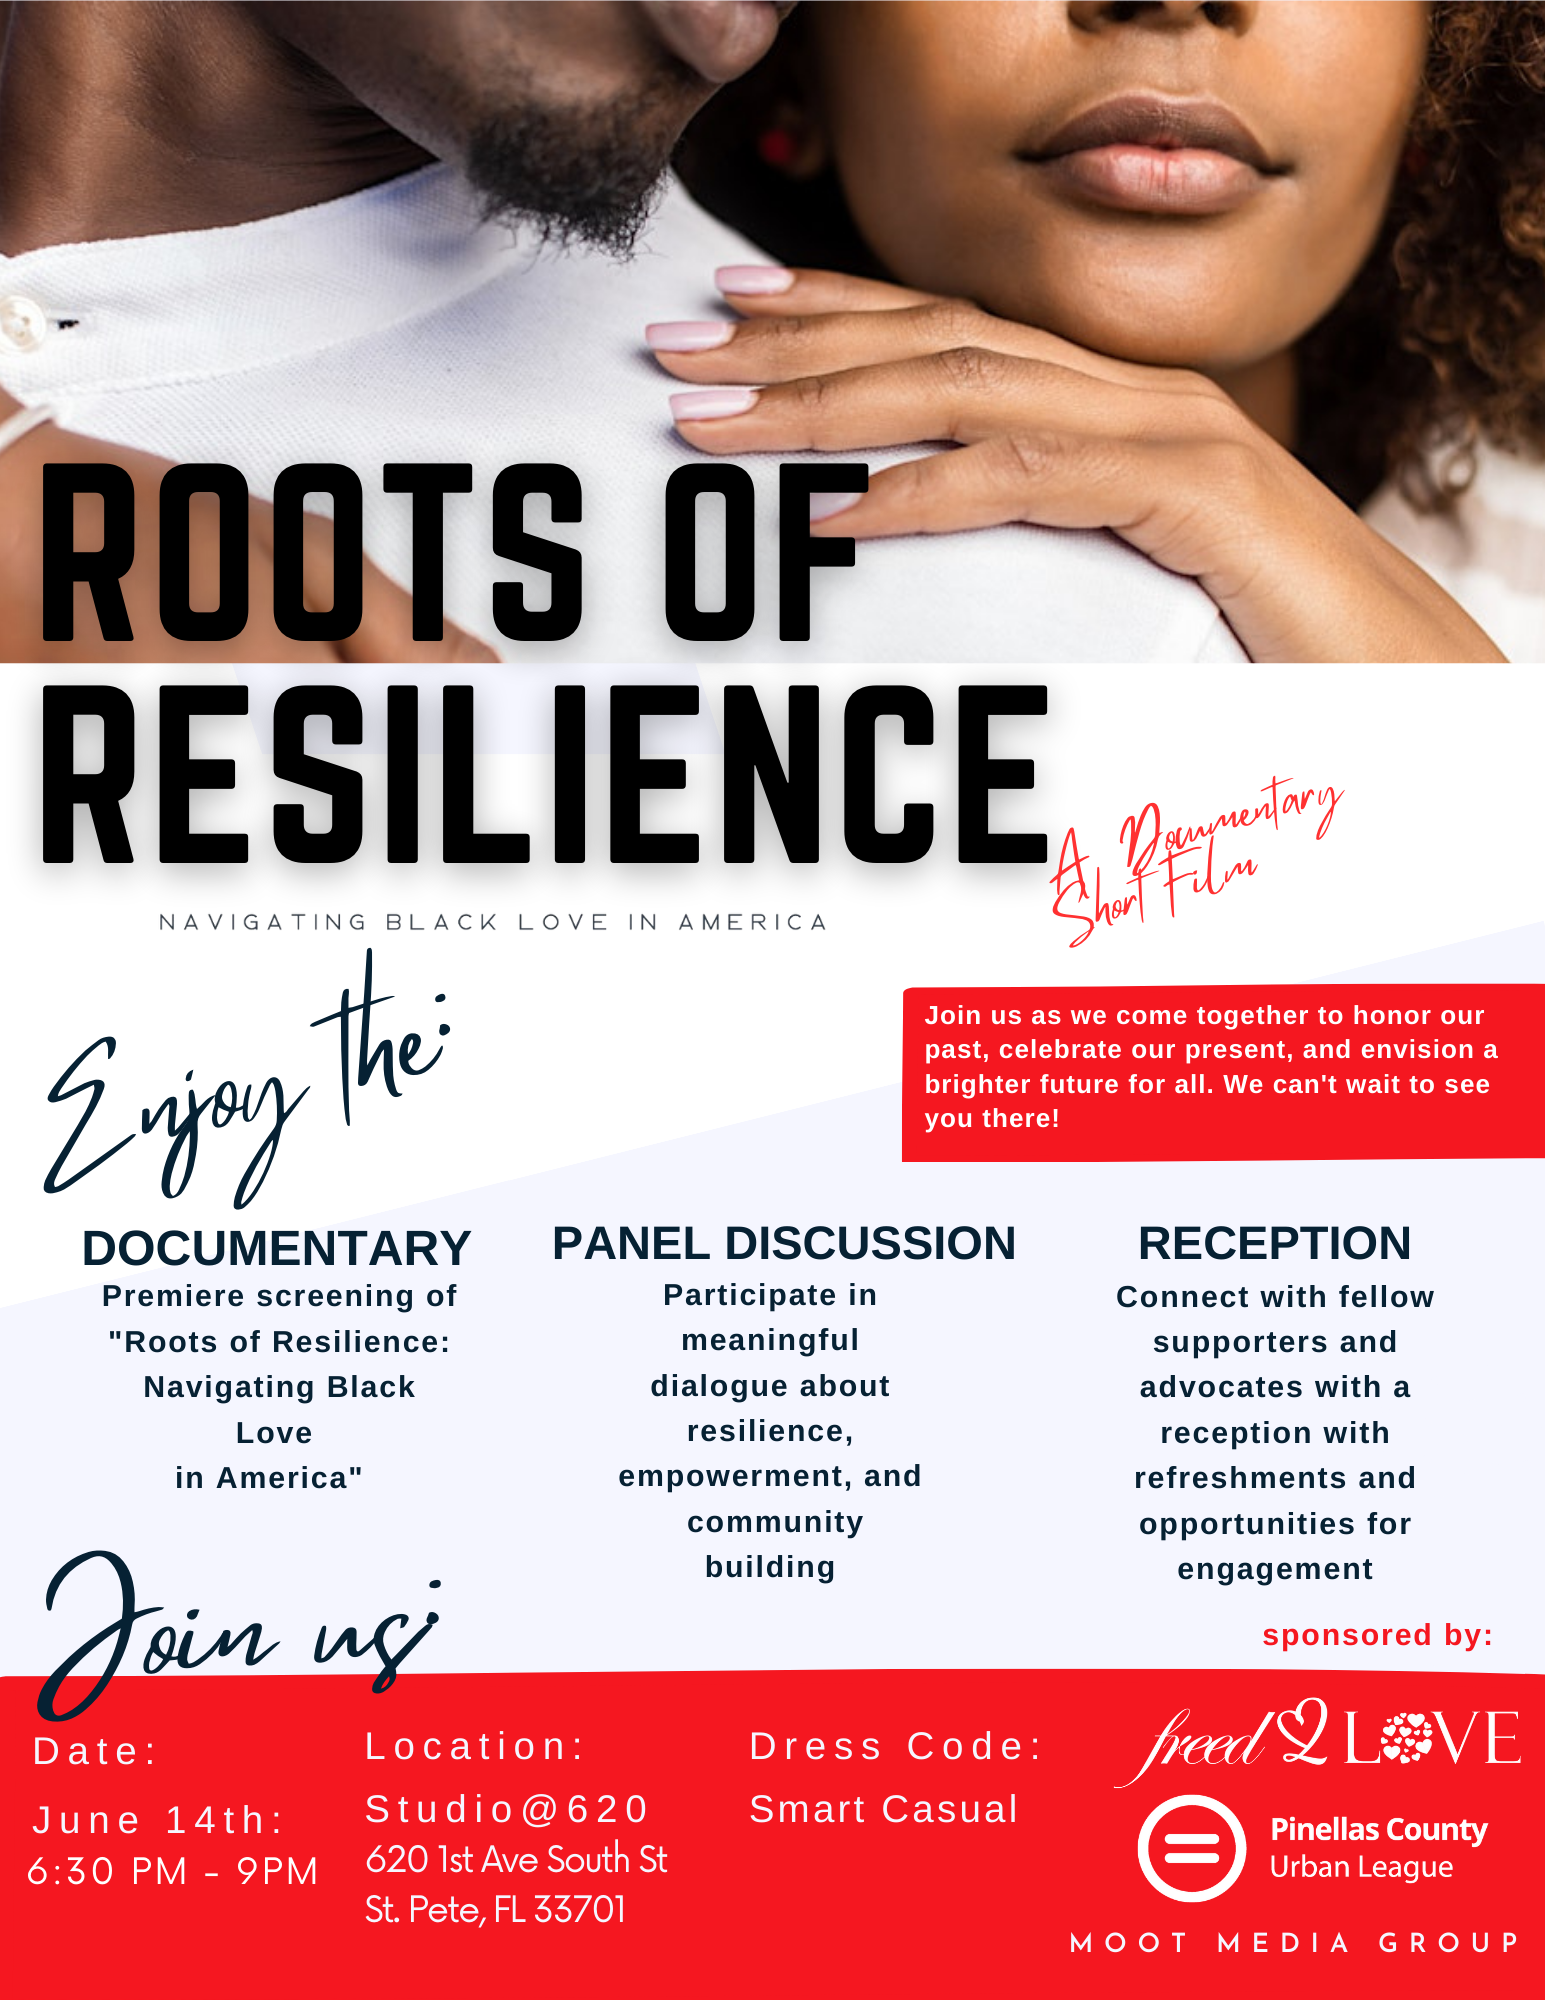 Roots of Resilience: Navigating Black Love in America